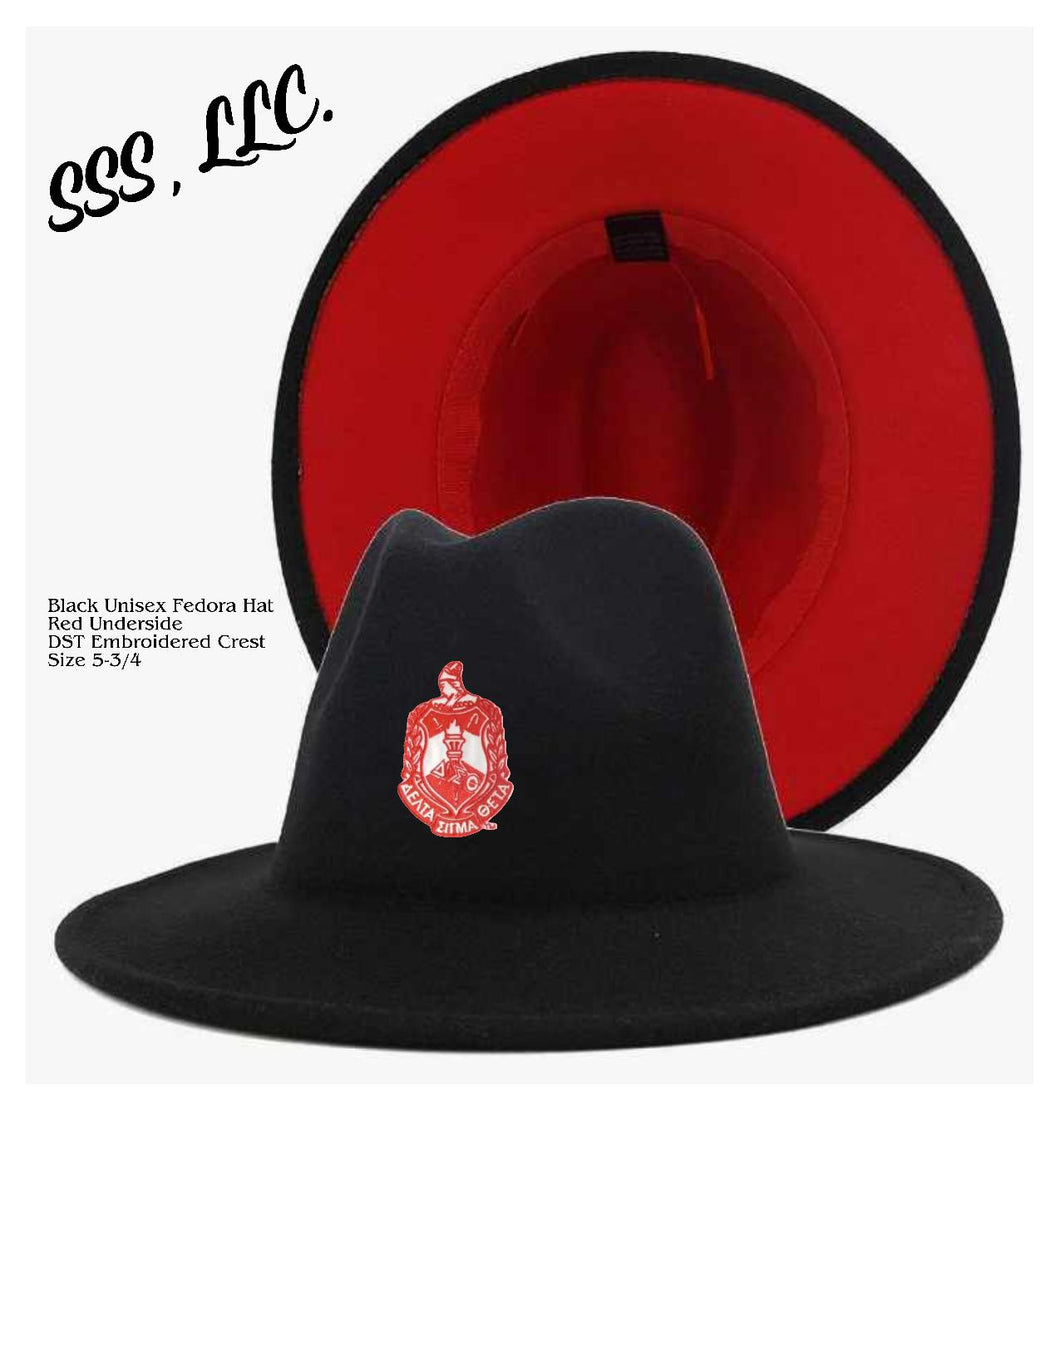 Two Toned Fedora Unisex Hat with the DST Embroidered Crest